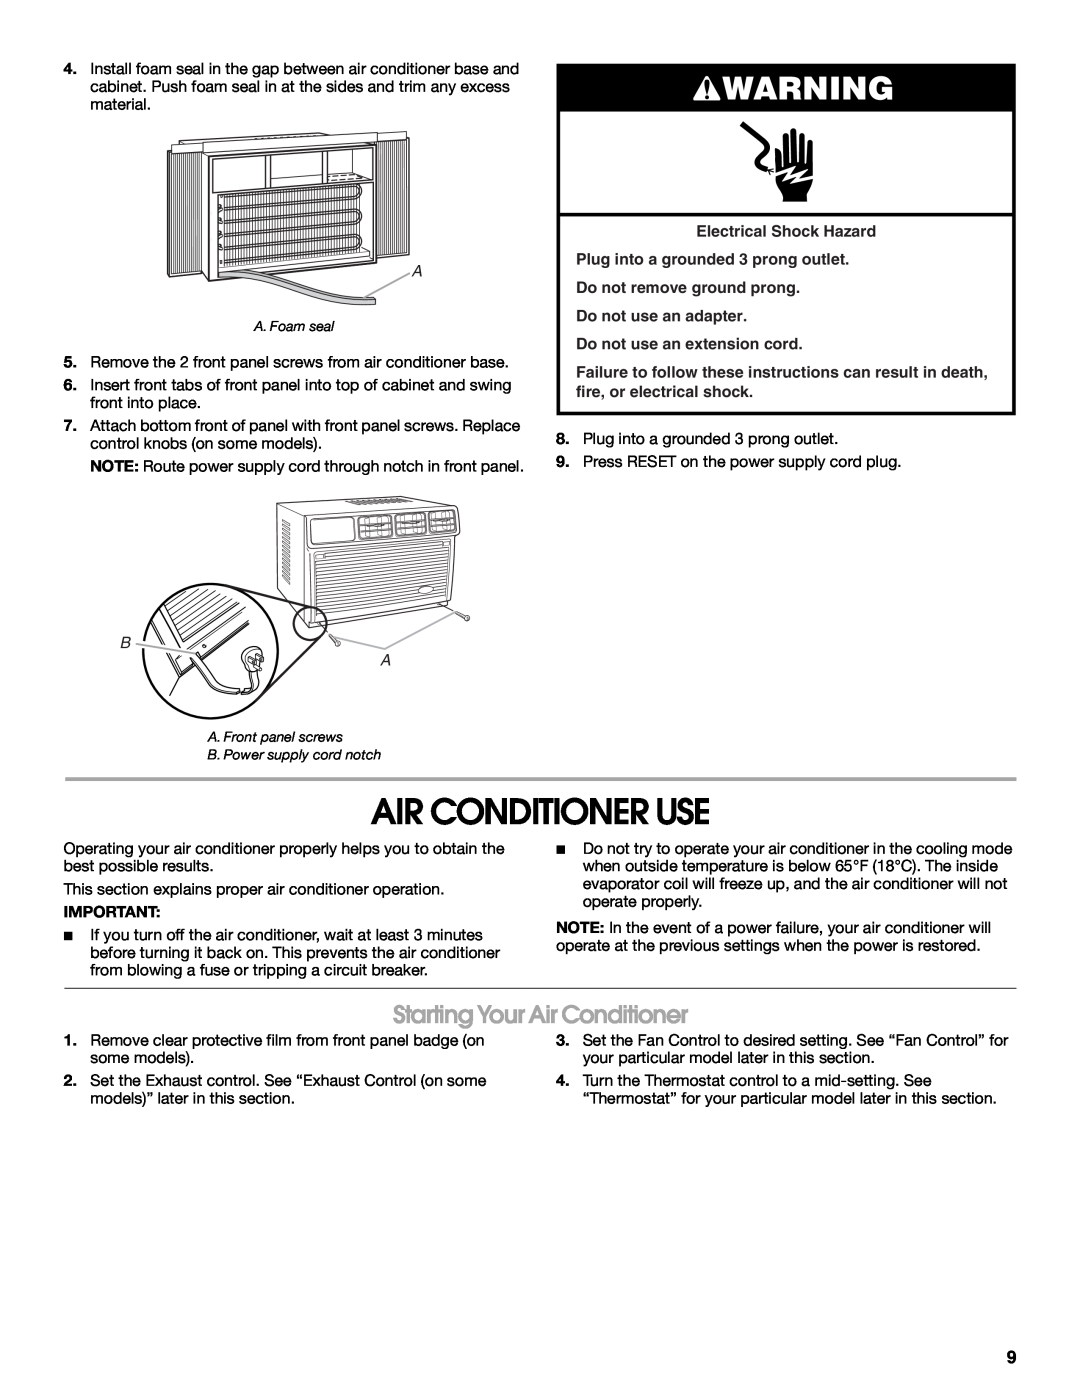 Whirlpool ACE082XR0 manual Air Conditioner Use, Starting Your Air Conditioner, Electrical Shock Hazard 